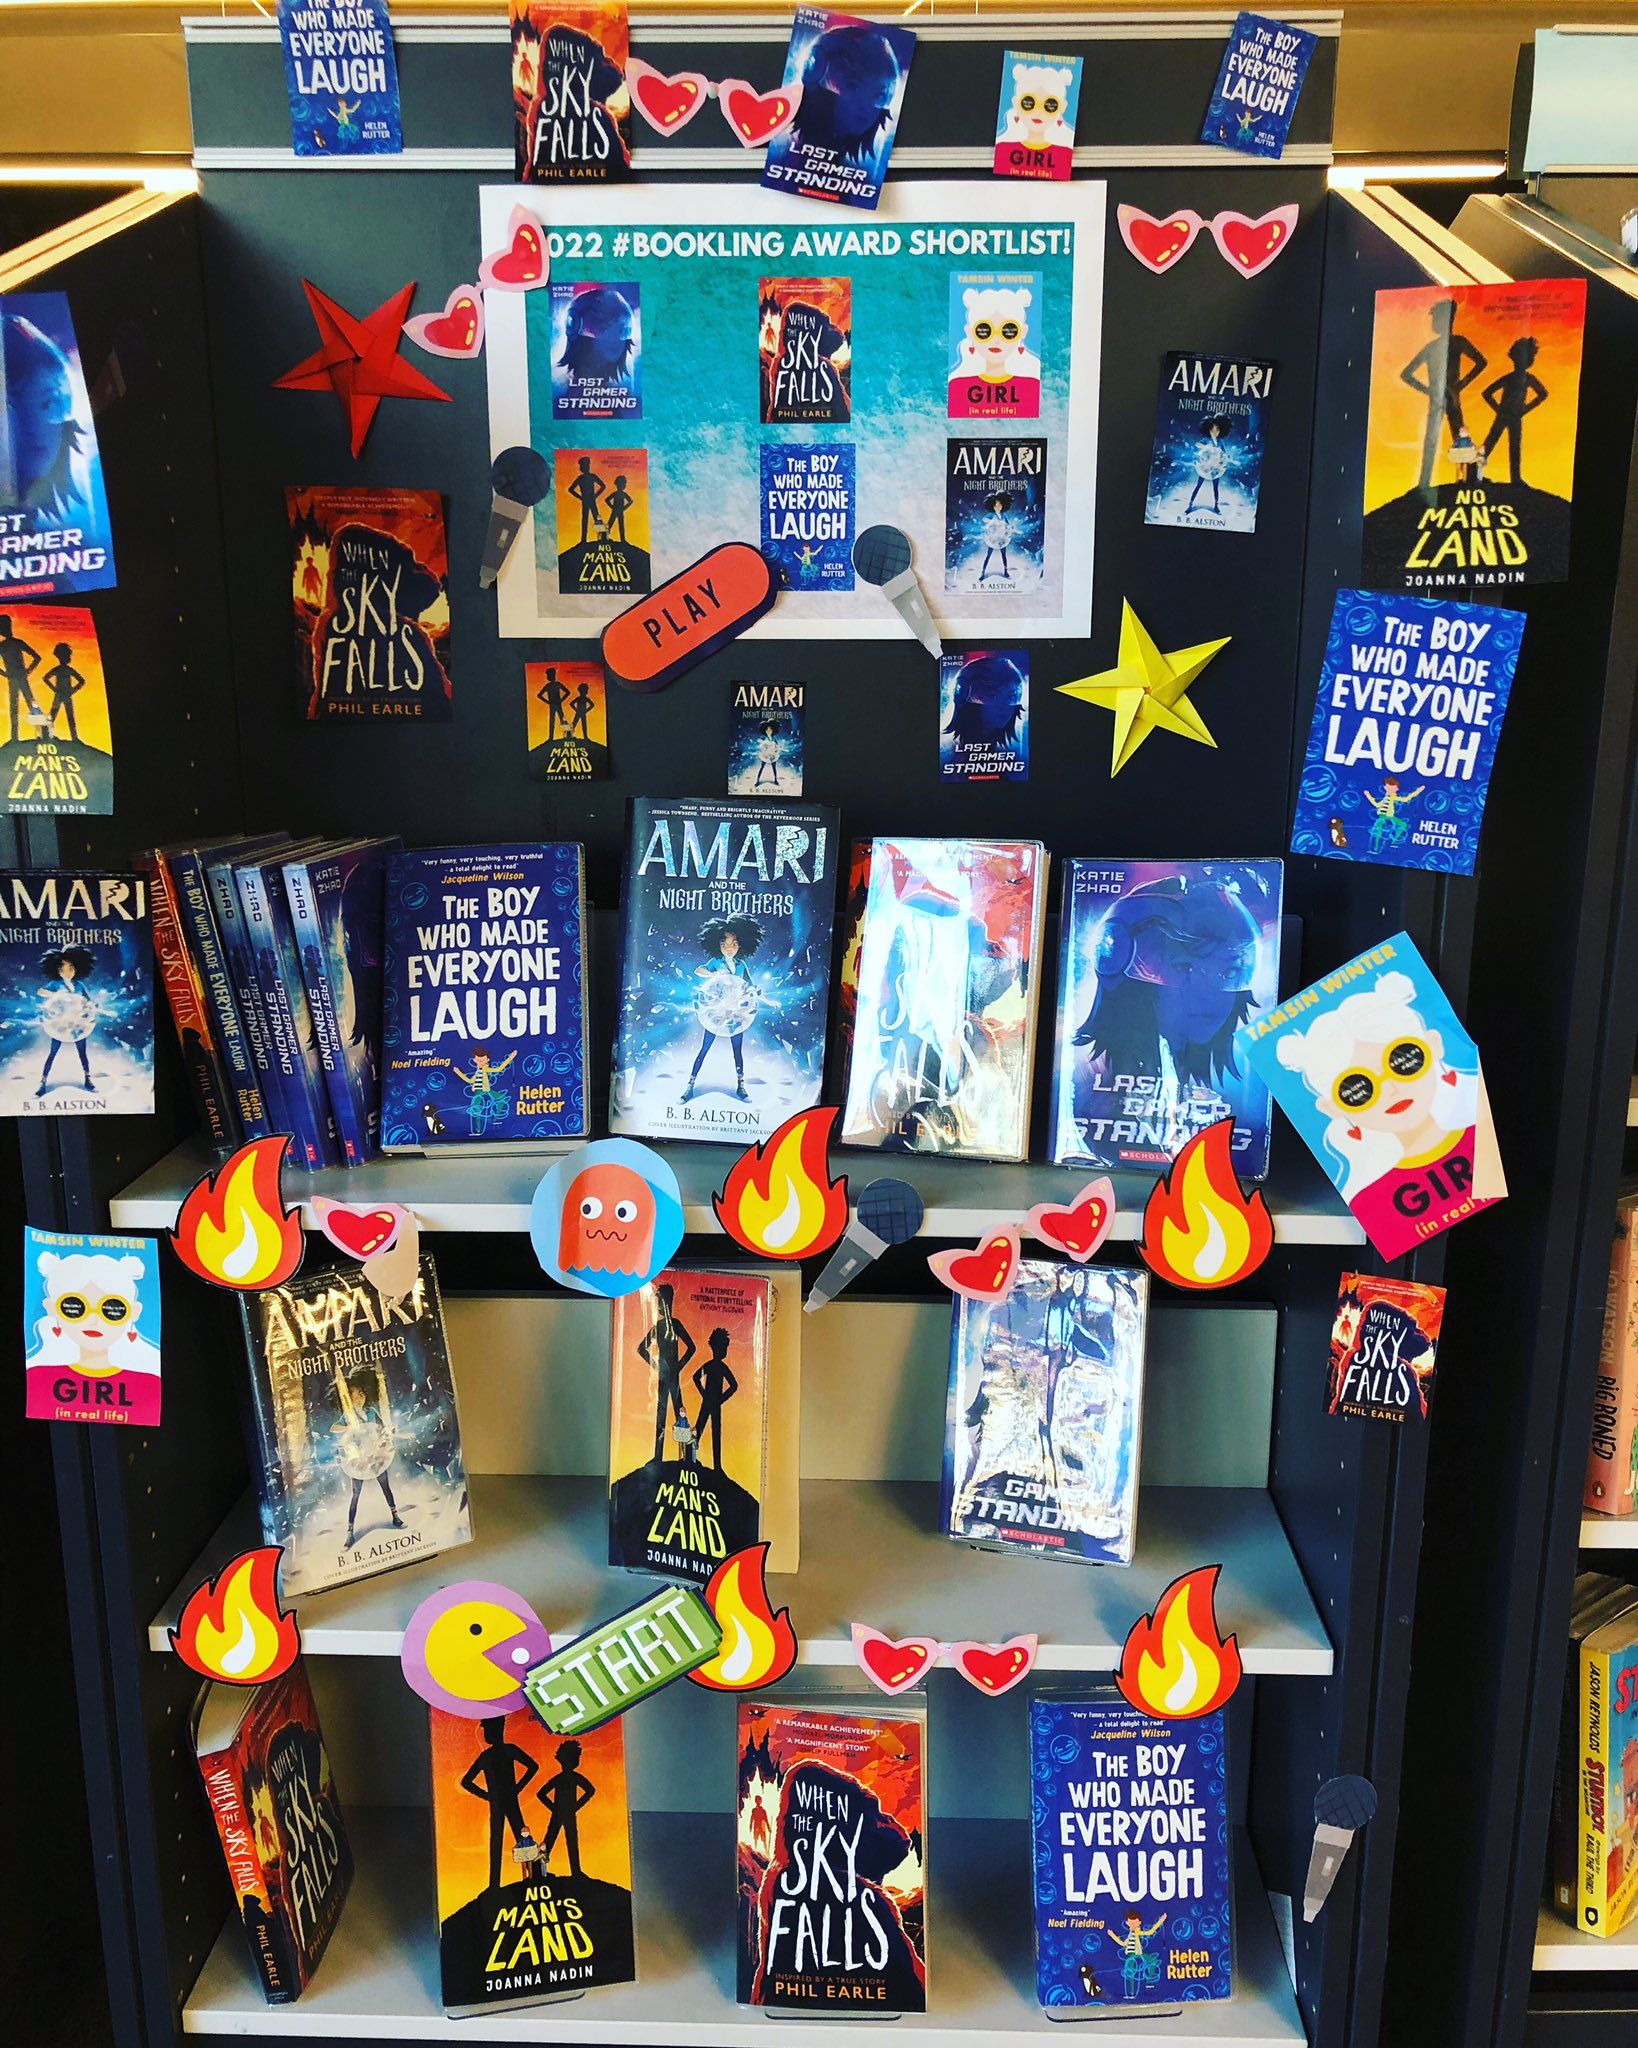 A library display of the Bookling Award Shortlist